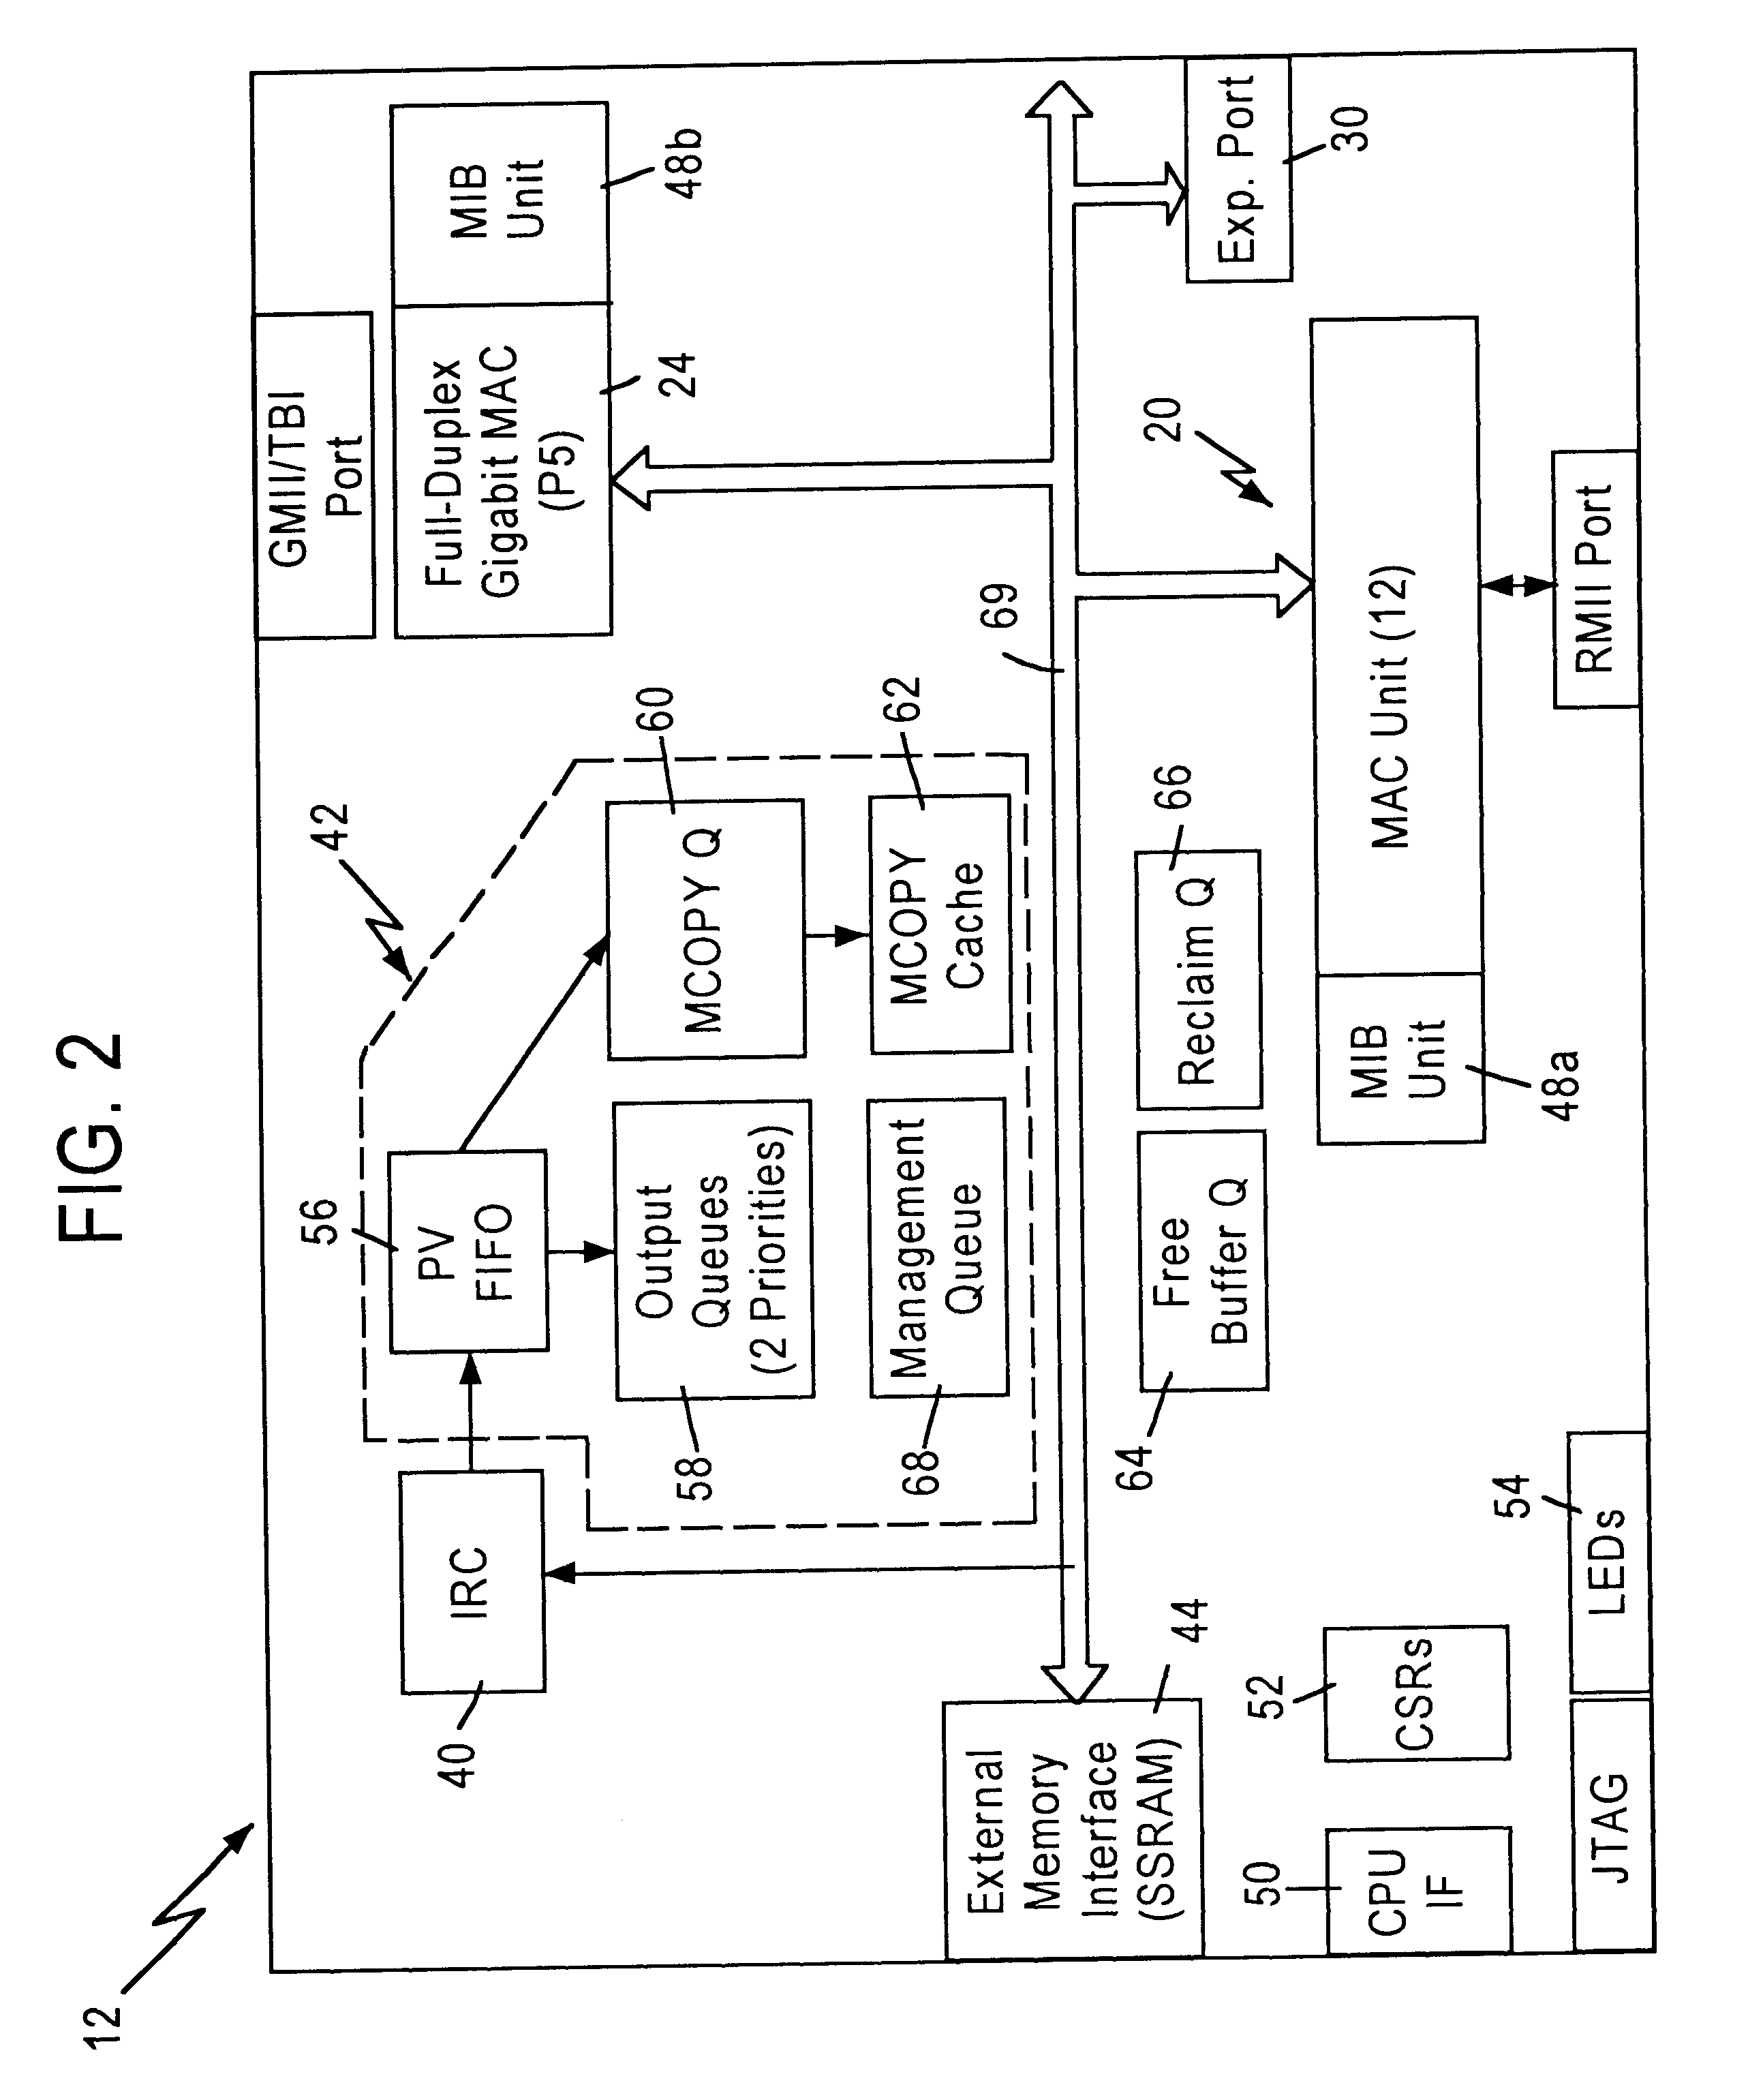 Method and apparatus for finding a match entry using receive port number embedded in the port vector